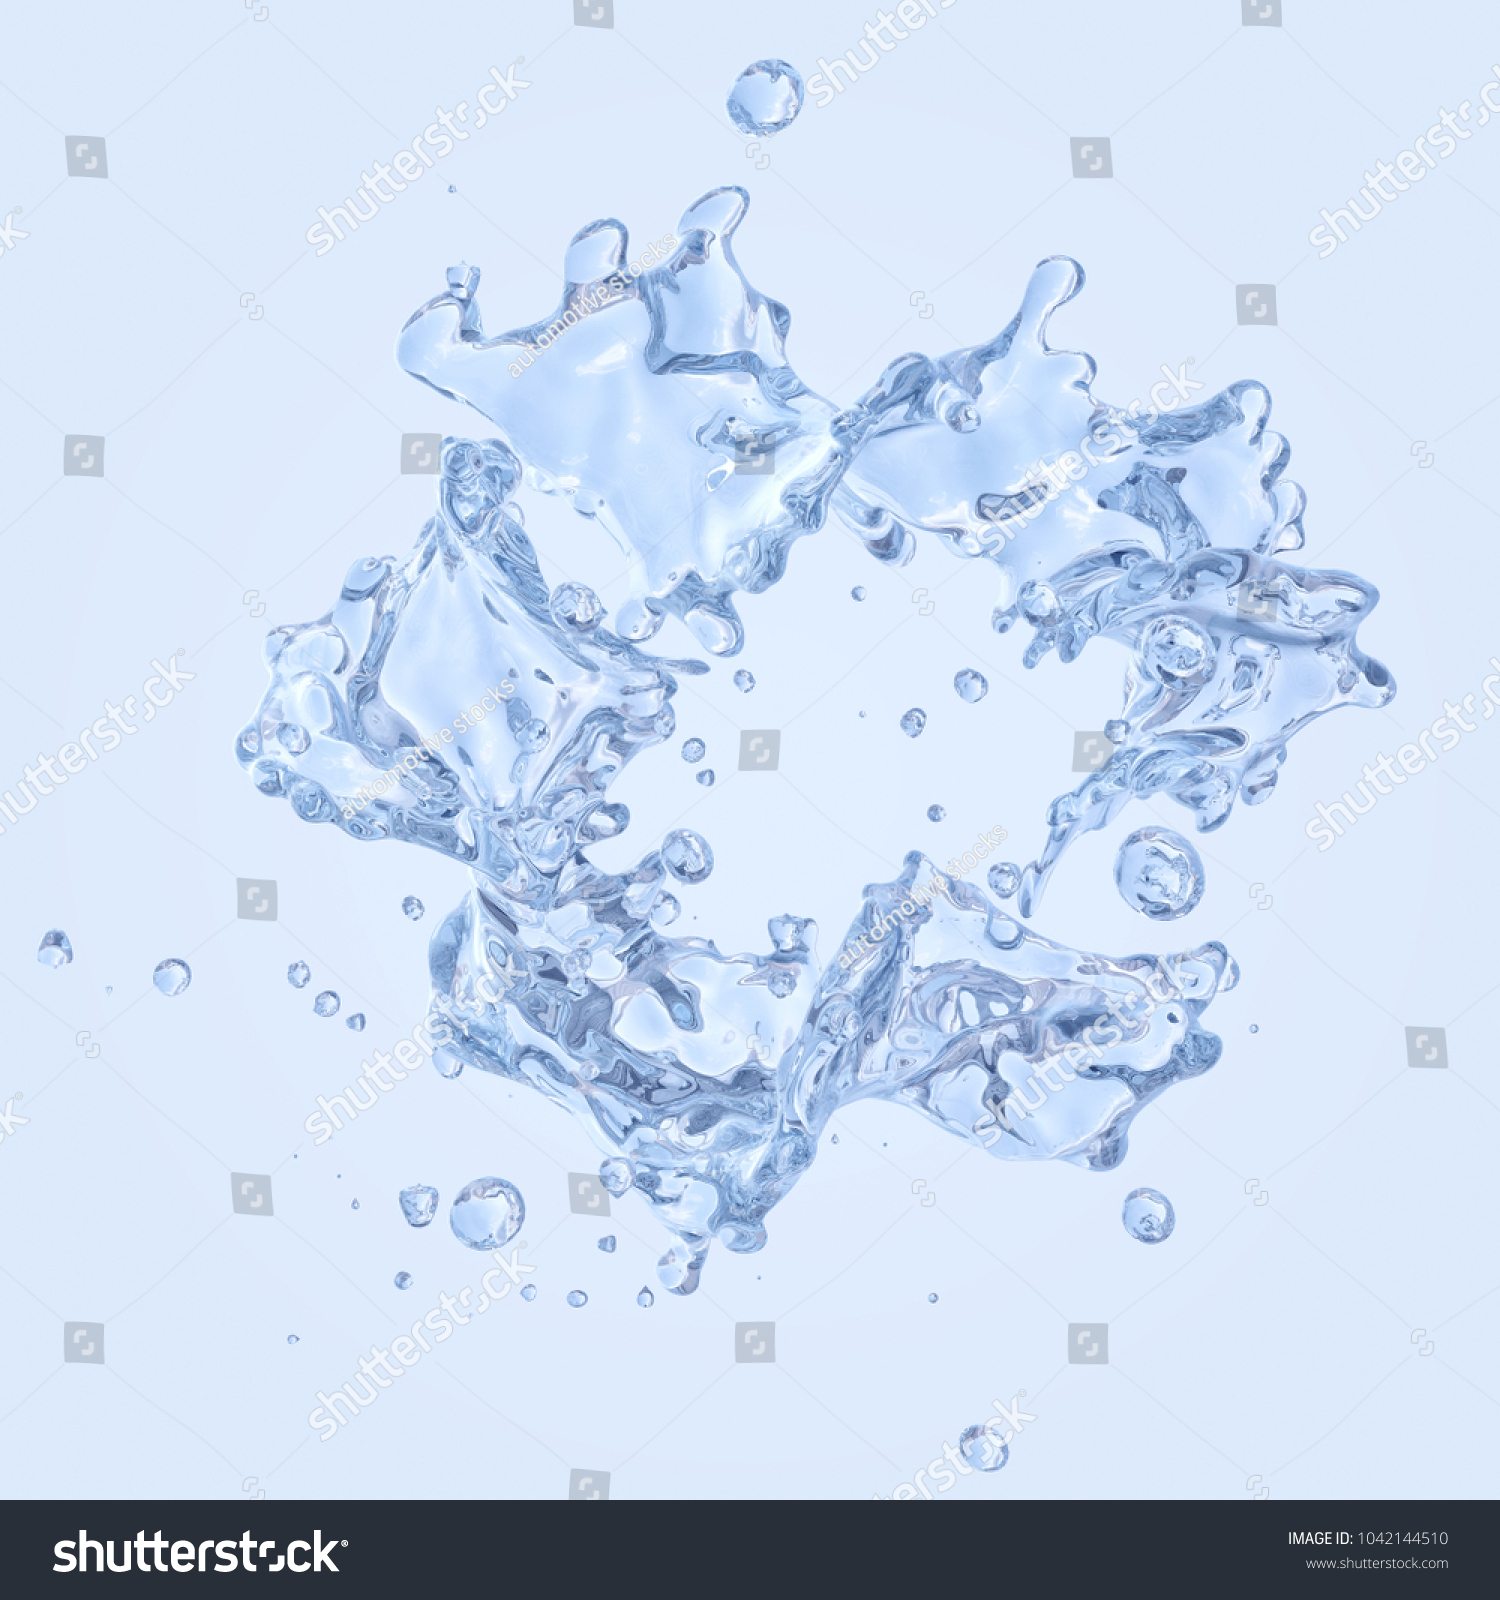 Water splash with water droplets in the form of ring isolated on light background. 3D illustration #1042144510